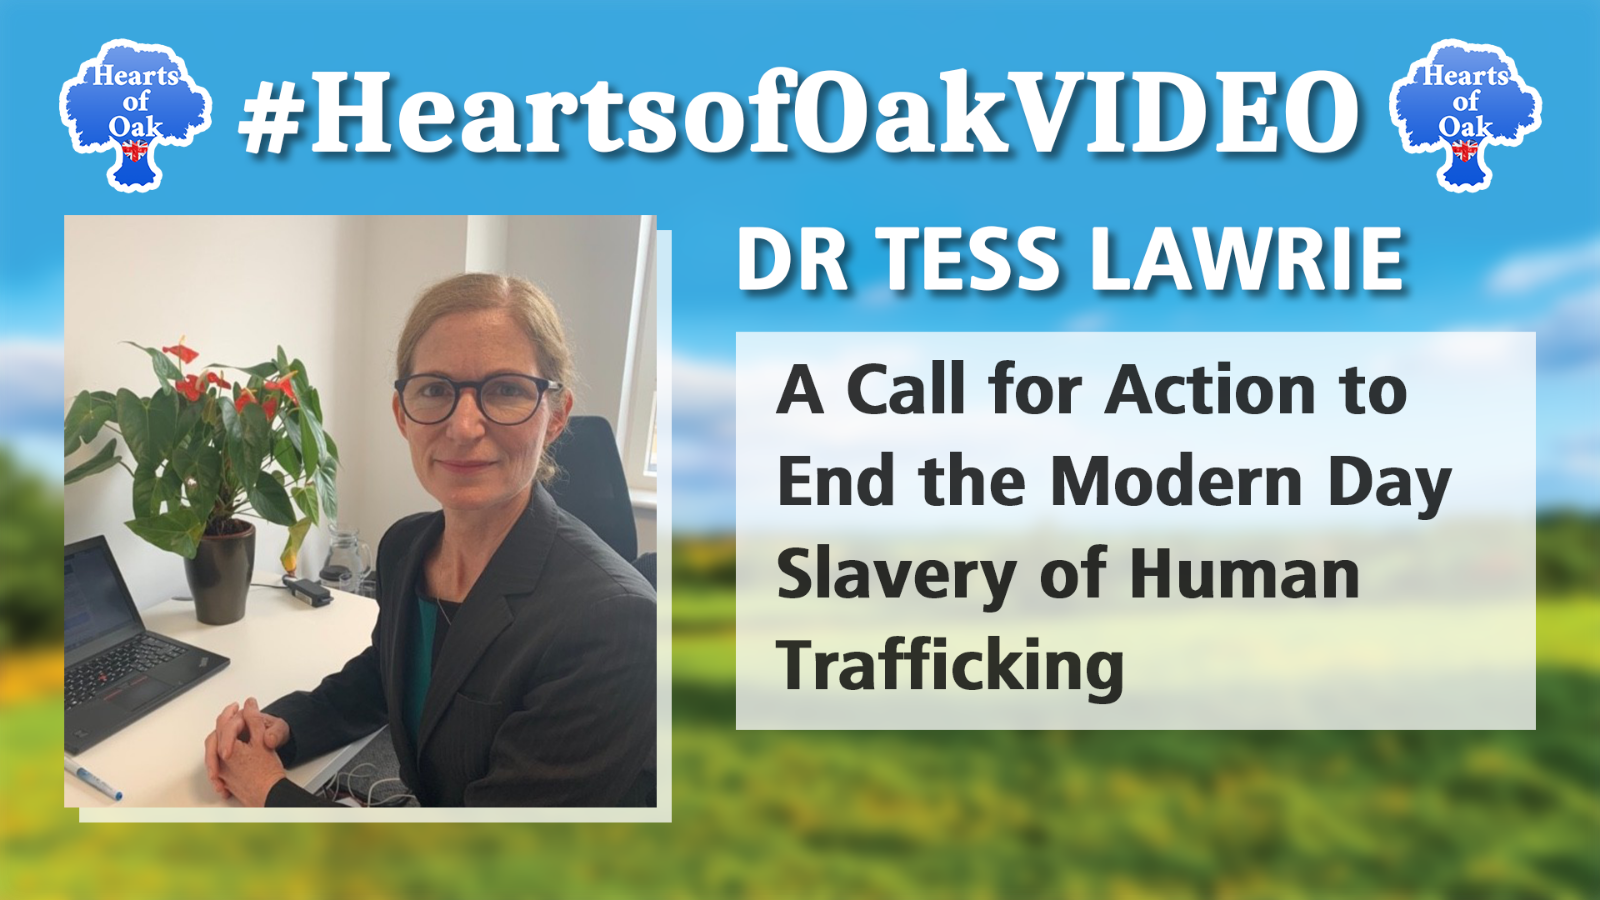 Dr Tess Lawrie - A Call for Action to End the Modern Day Slavery of Human Trafficking